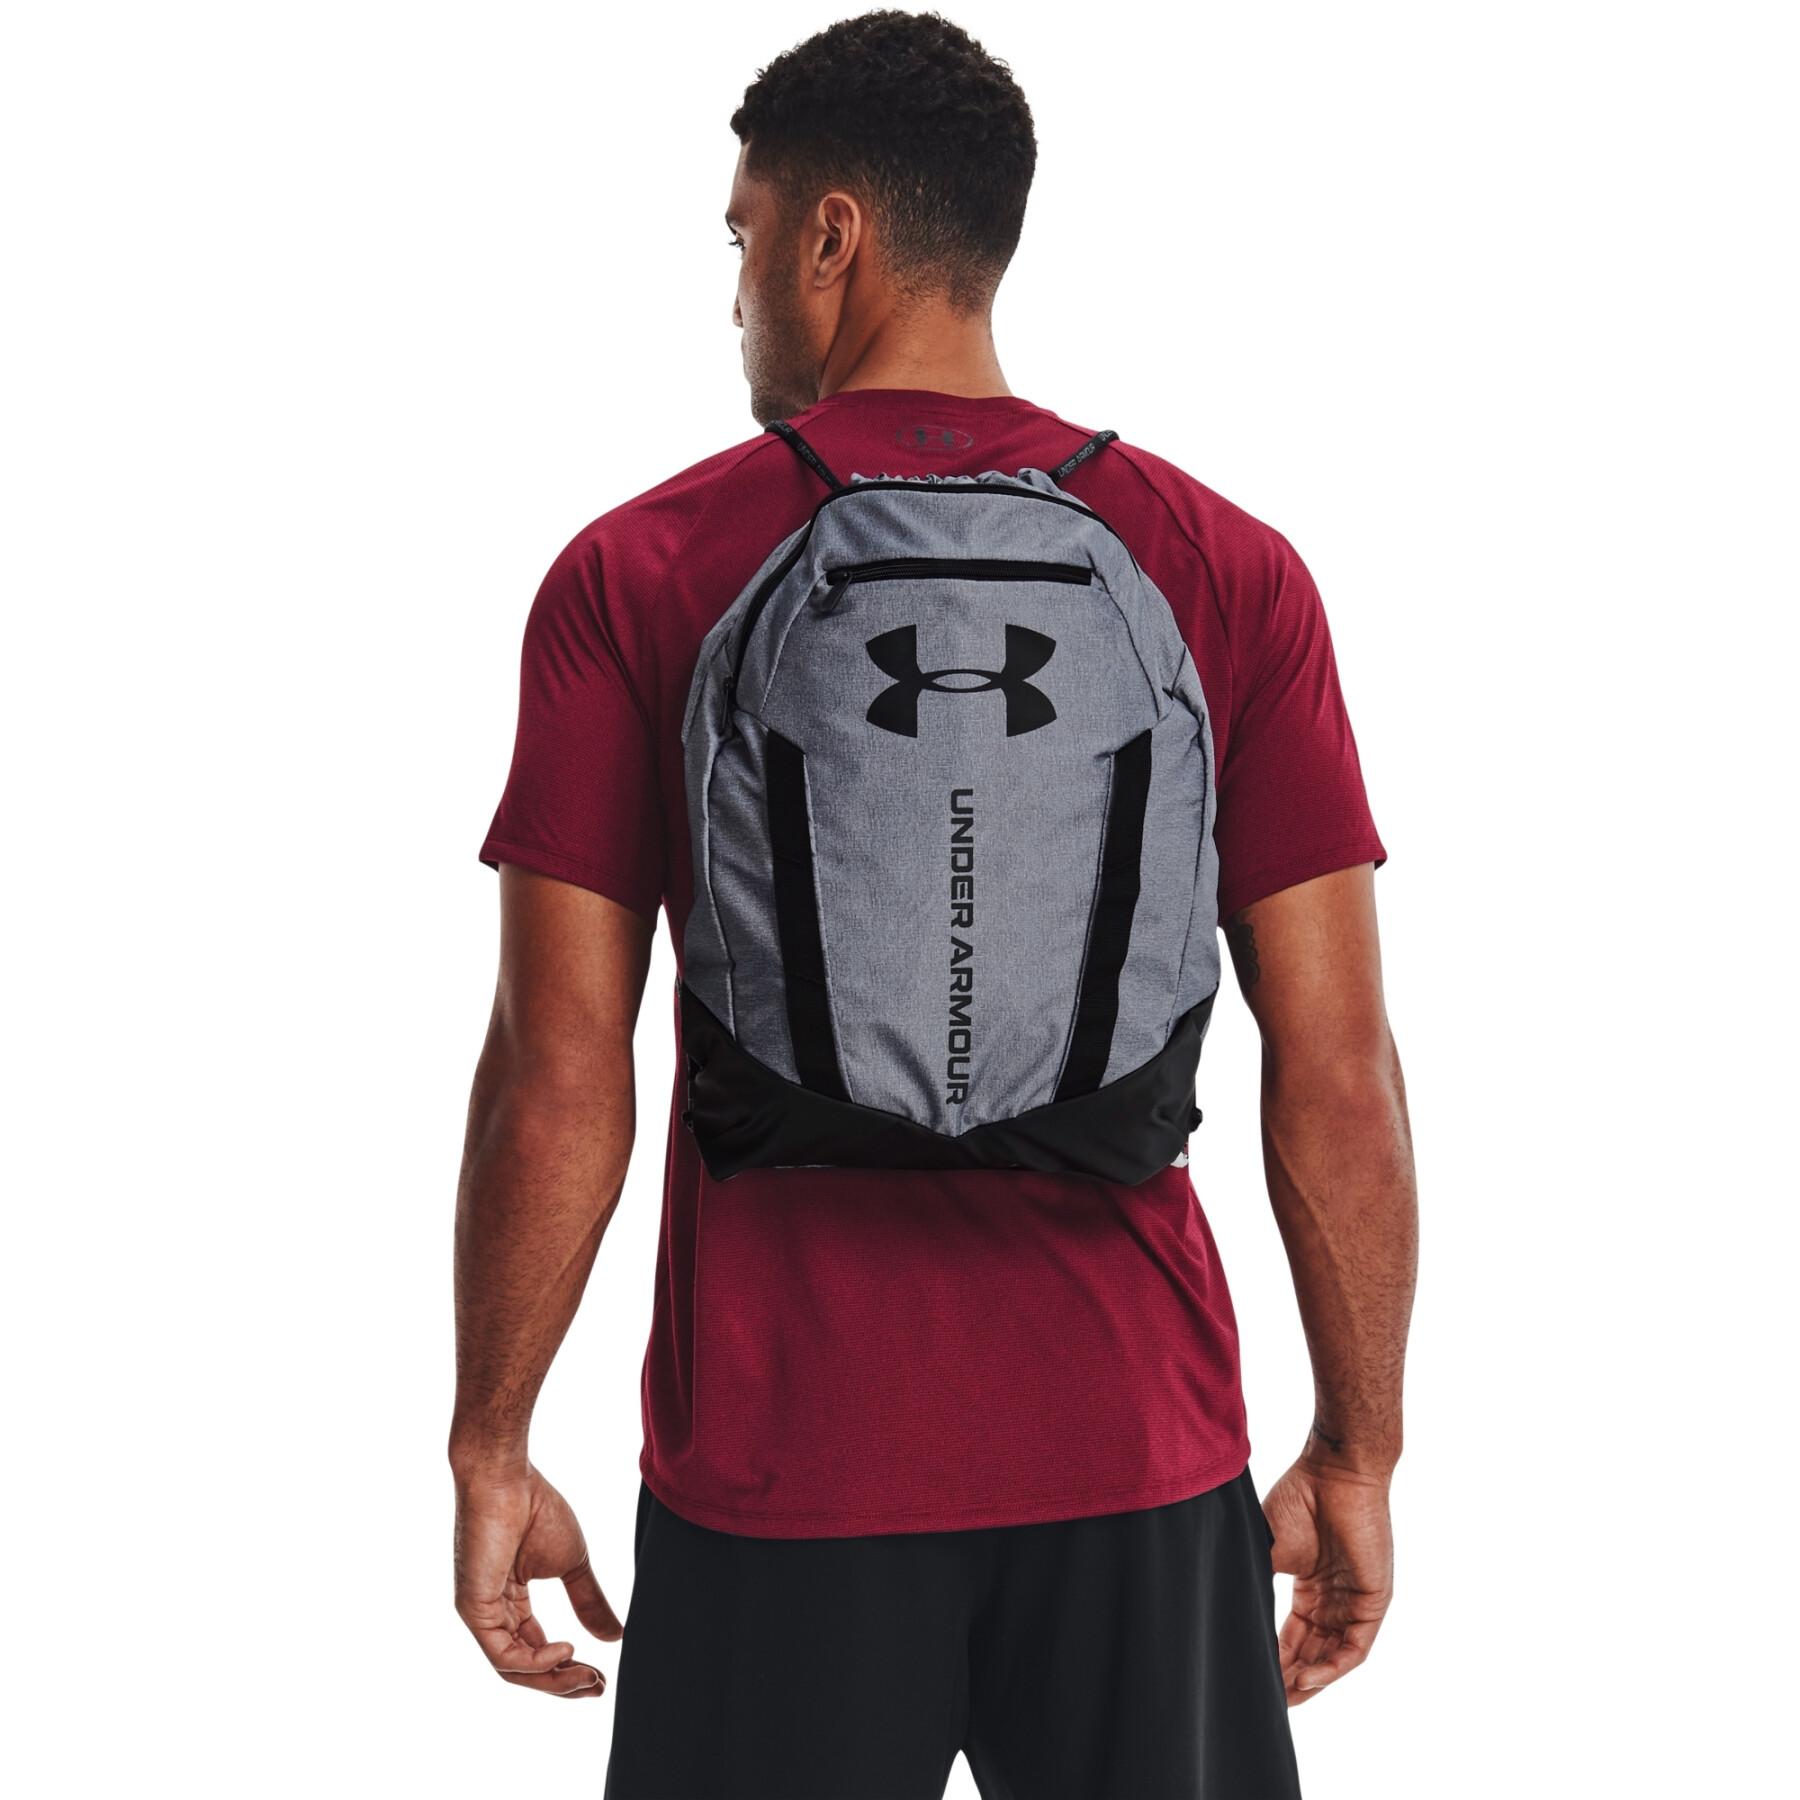 Undeniable backpack Under Armour